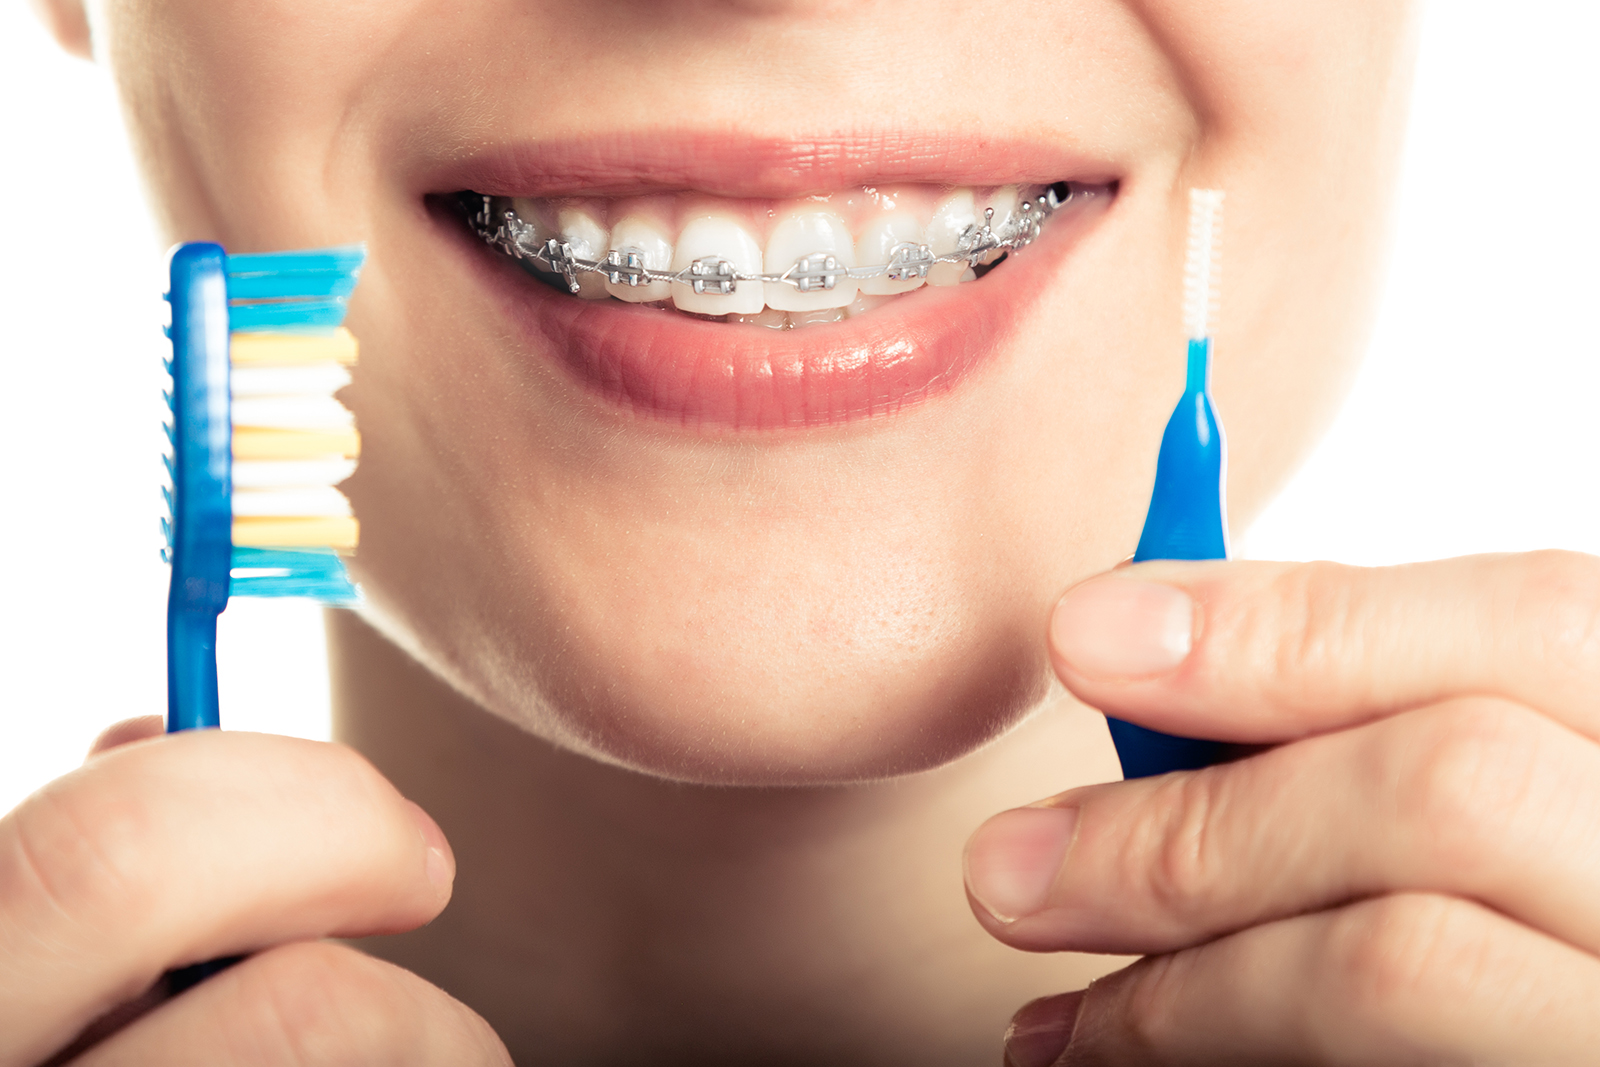 Ask Your Forney Dentist: What Are Some Must-Haves for Cleaning Braces and Aligners?